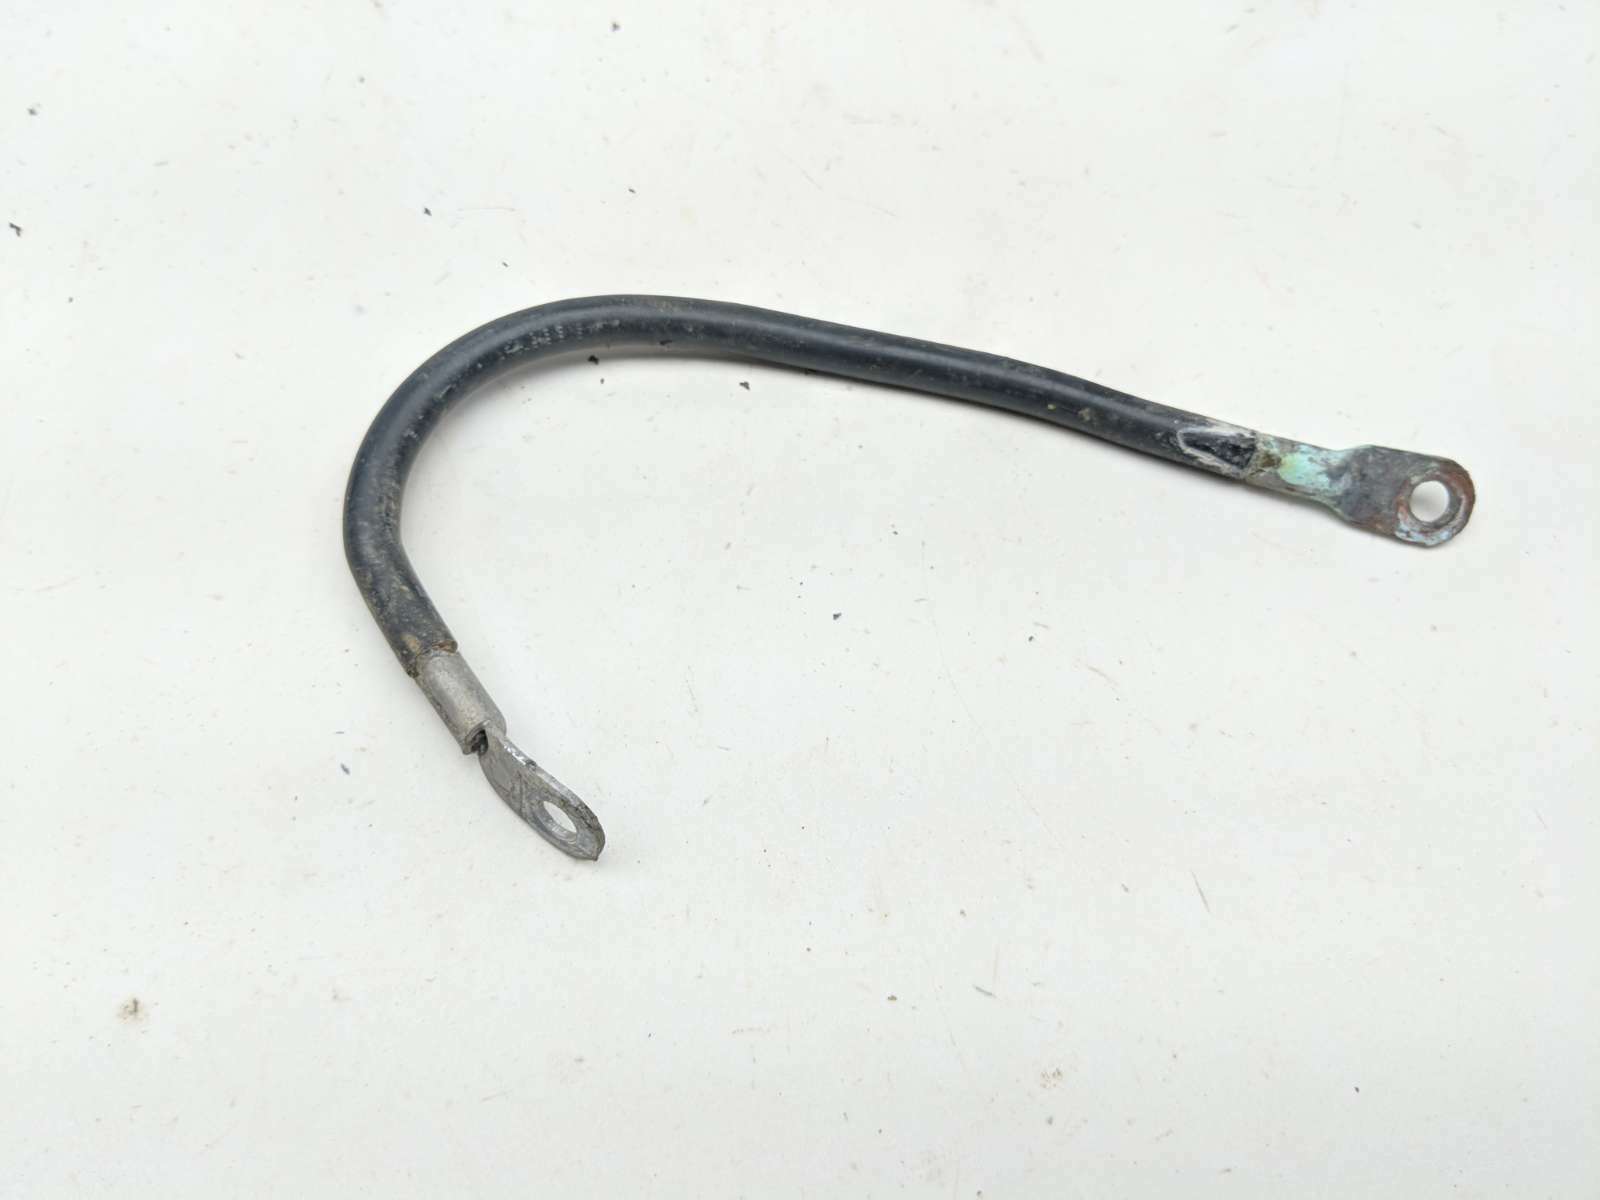 05 Polaris Ranger 700 4x4 Battery Wire Cable Lines